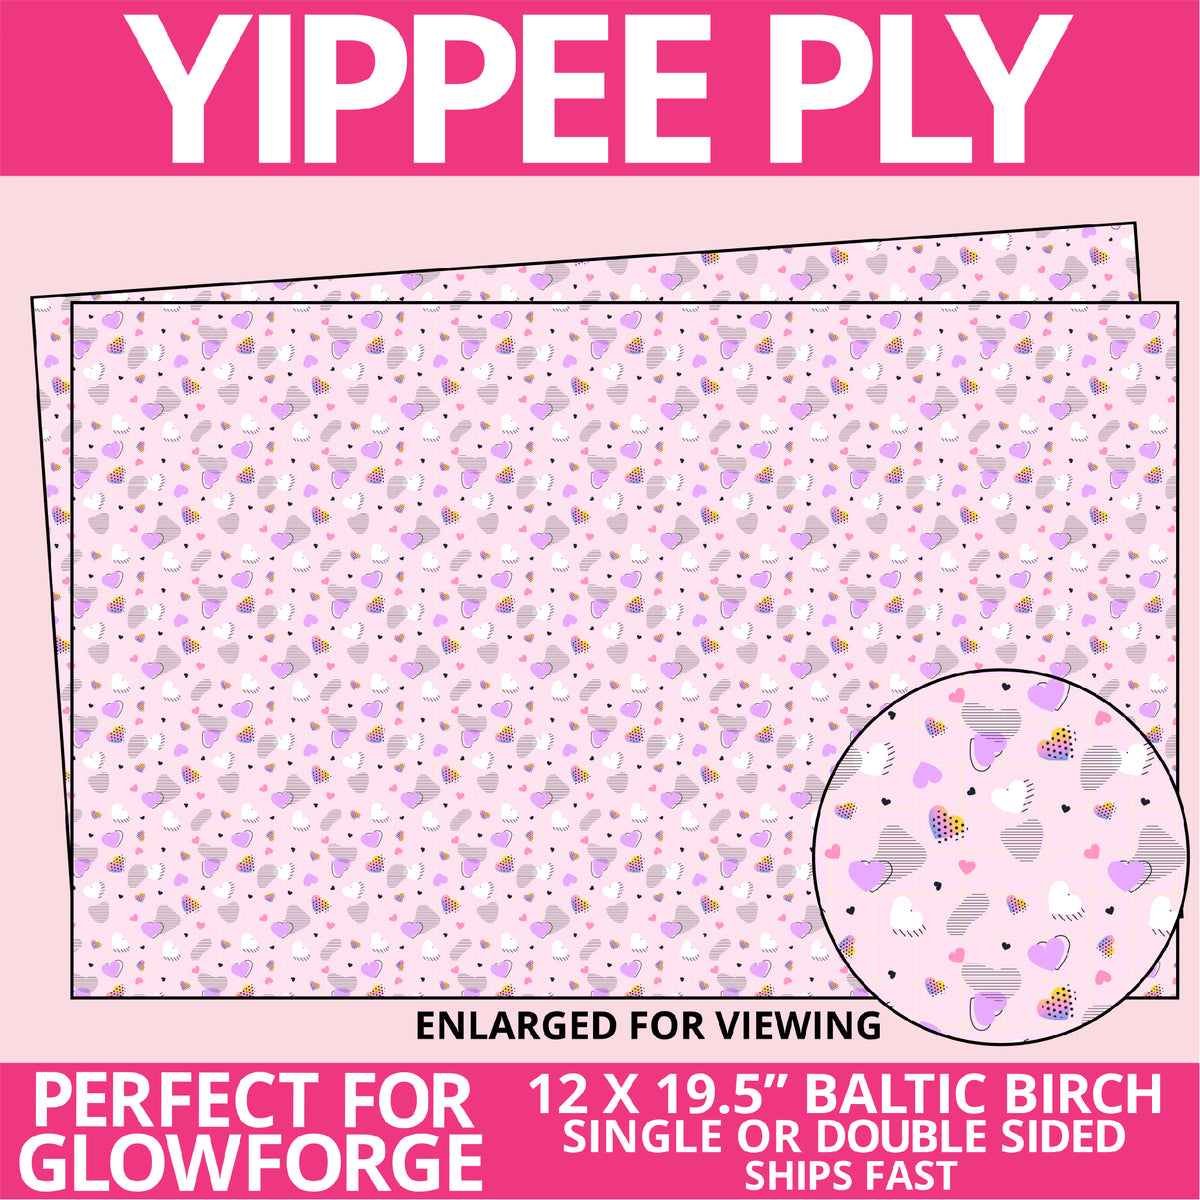 Yippee Ply Retro Heart Valentine Pattern on Birch Plywood 1002